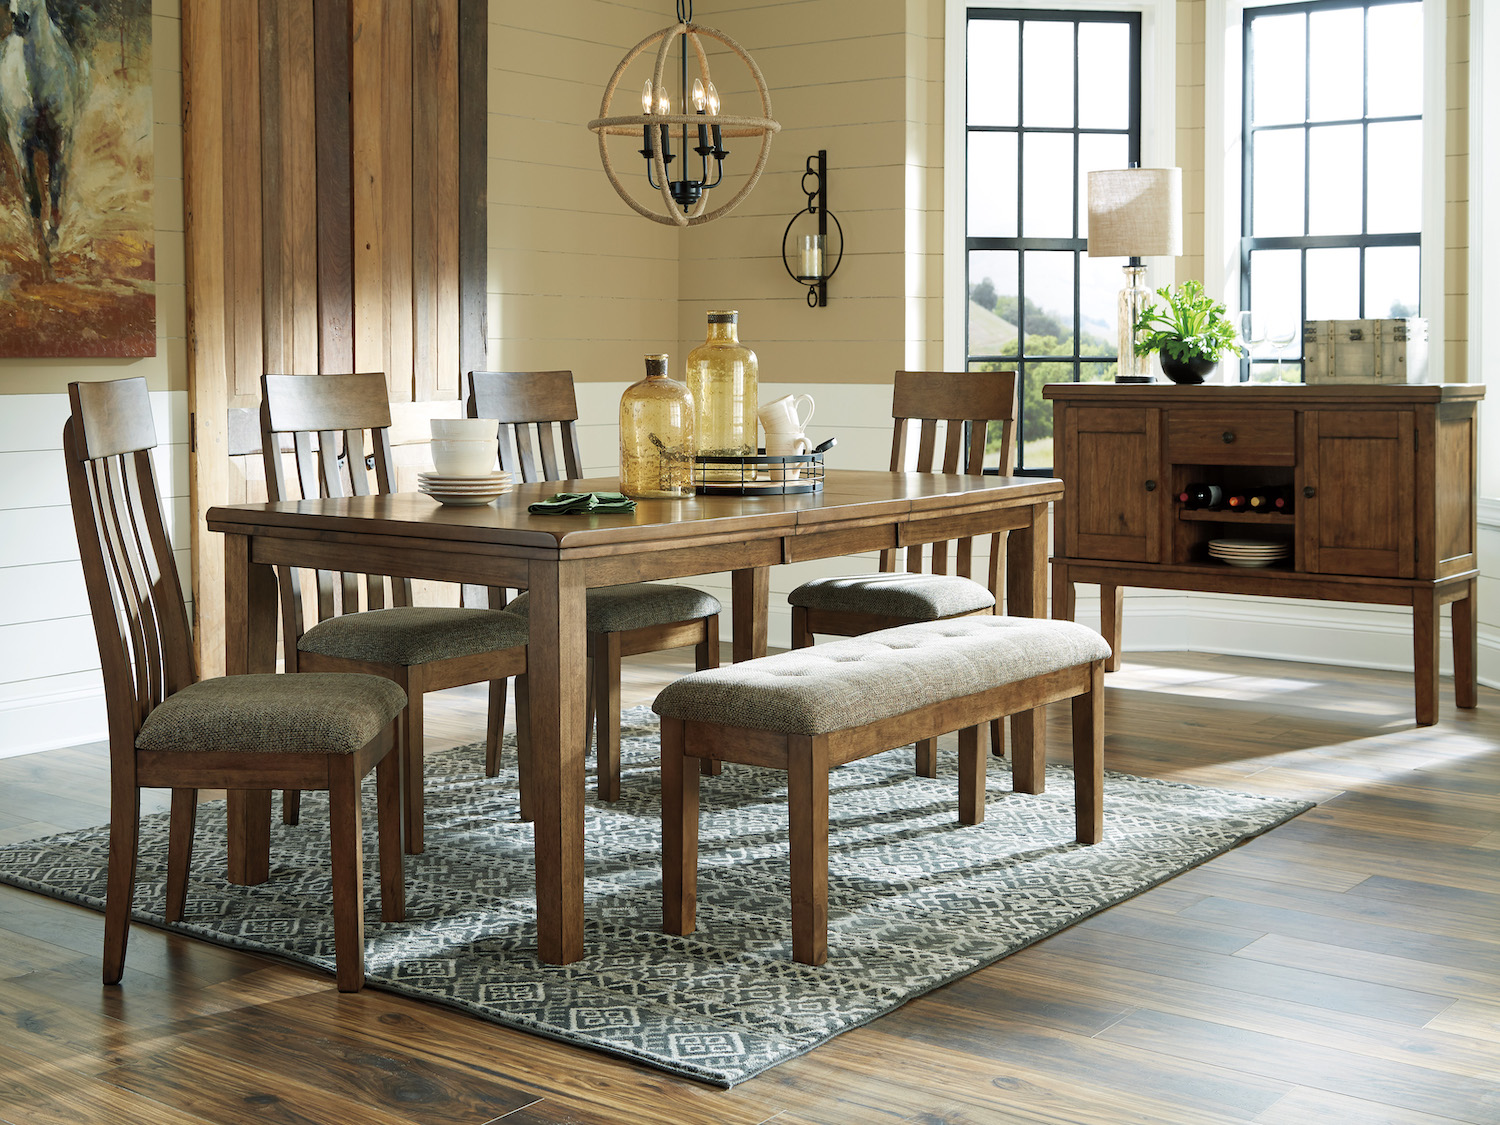 Get Dining Room Set From Ny To Fl